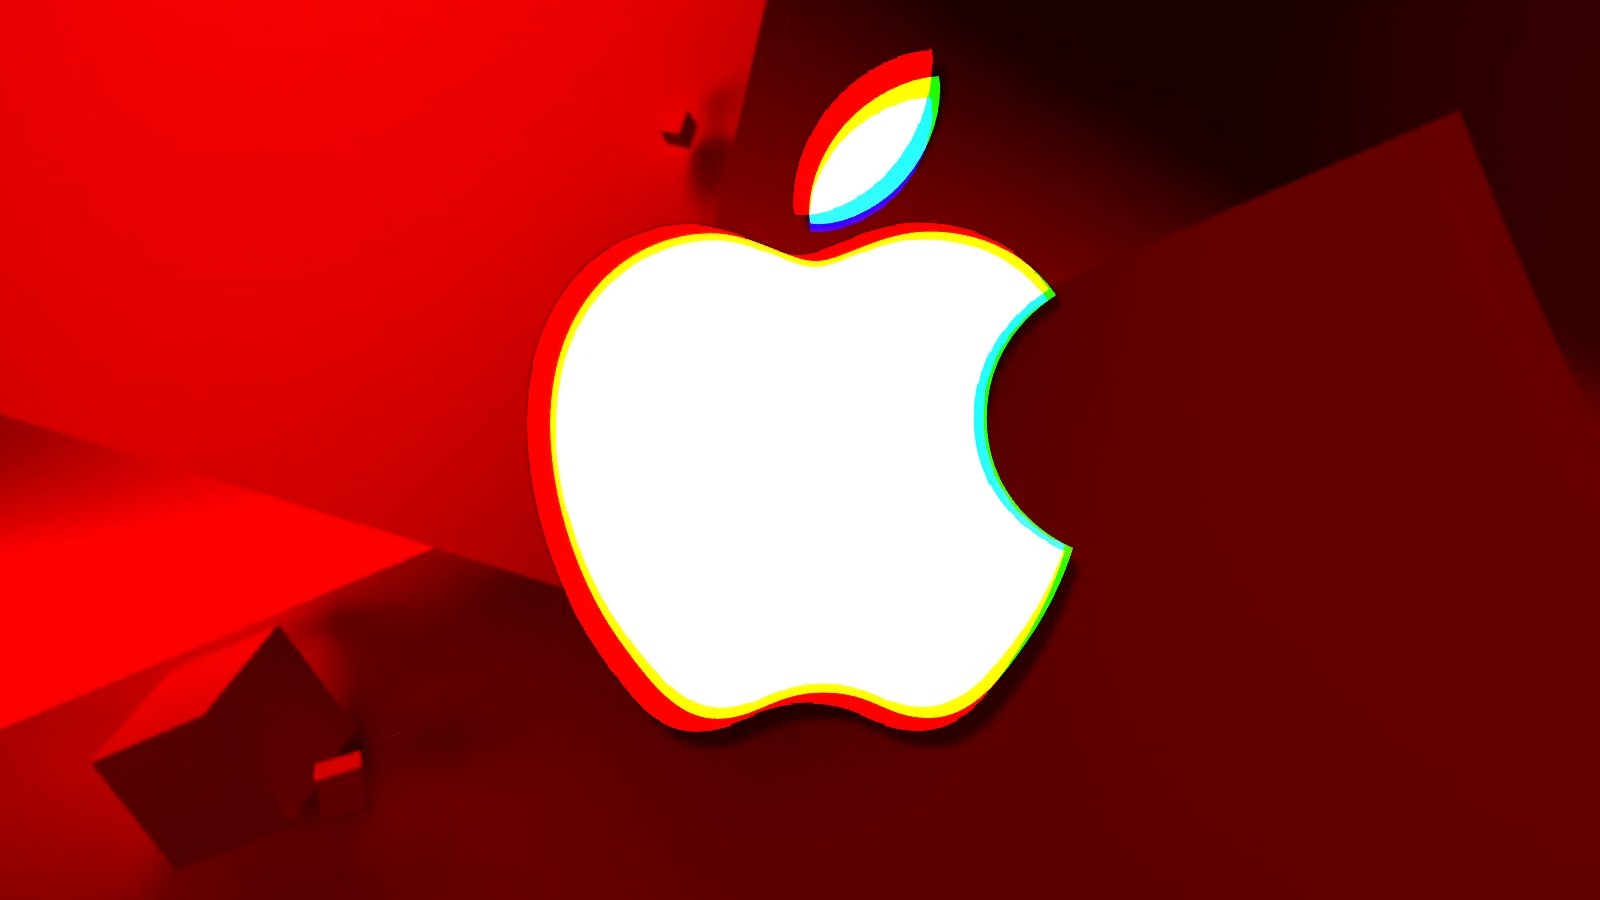 Recently patched Apple, Chrome zero-days exploited in spyware attacks – Source: www.bleepingcomputer.com